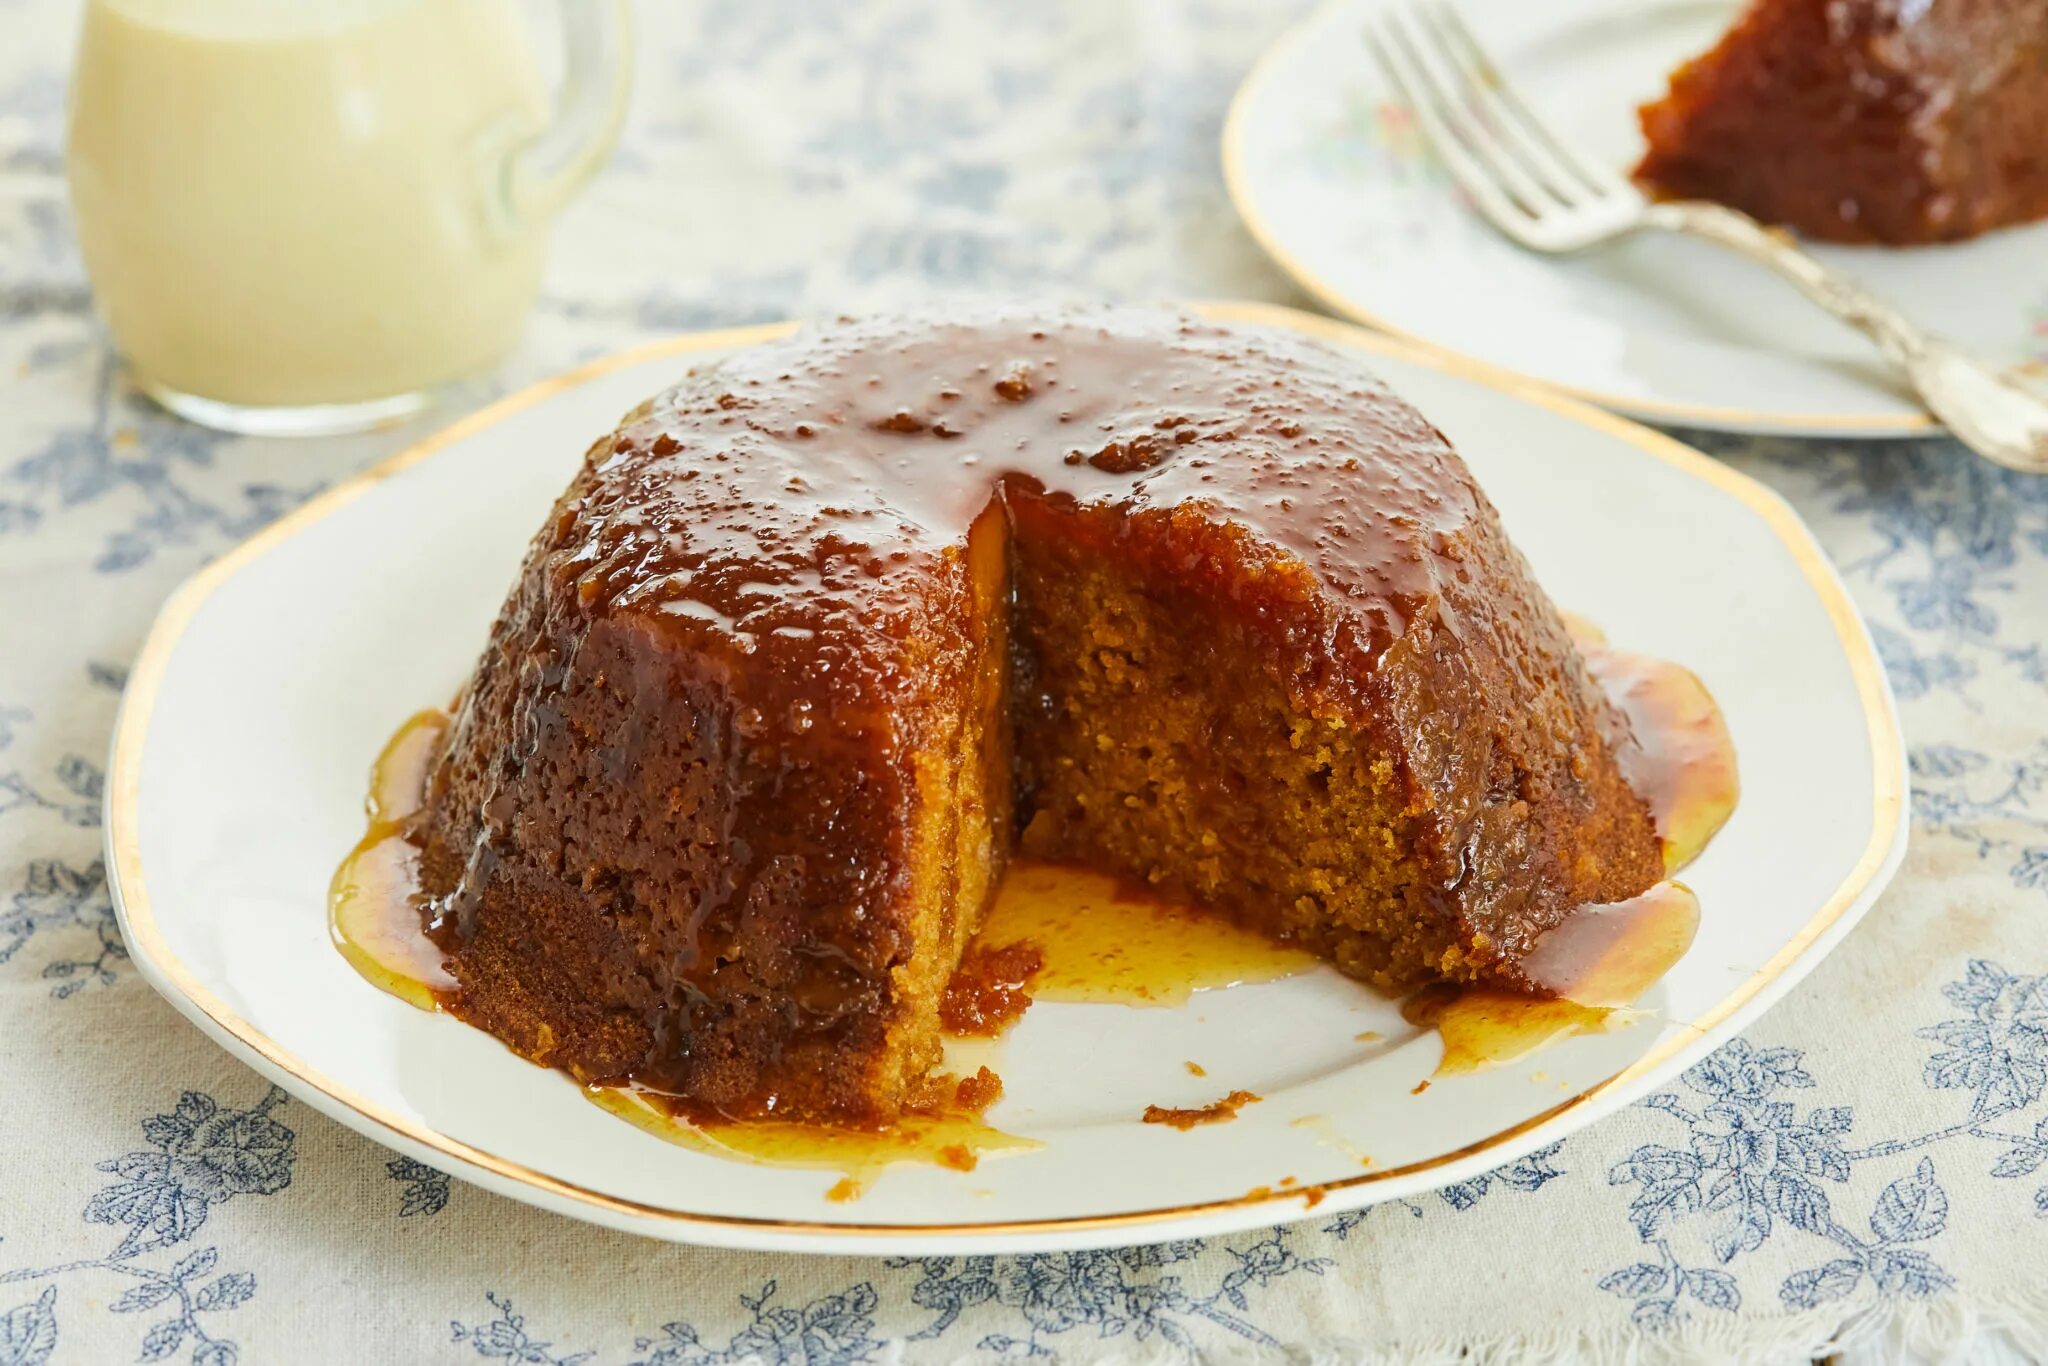 Treacle Sponge Pudding. Steamed Treacle Pudding. Дамасский пудинг.